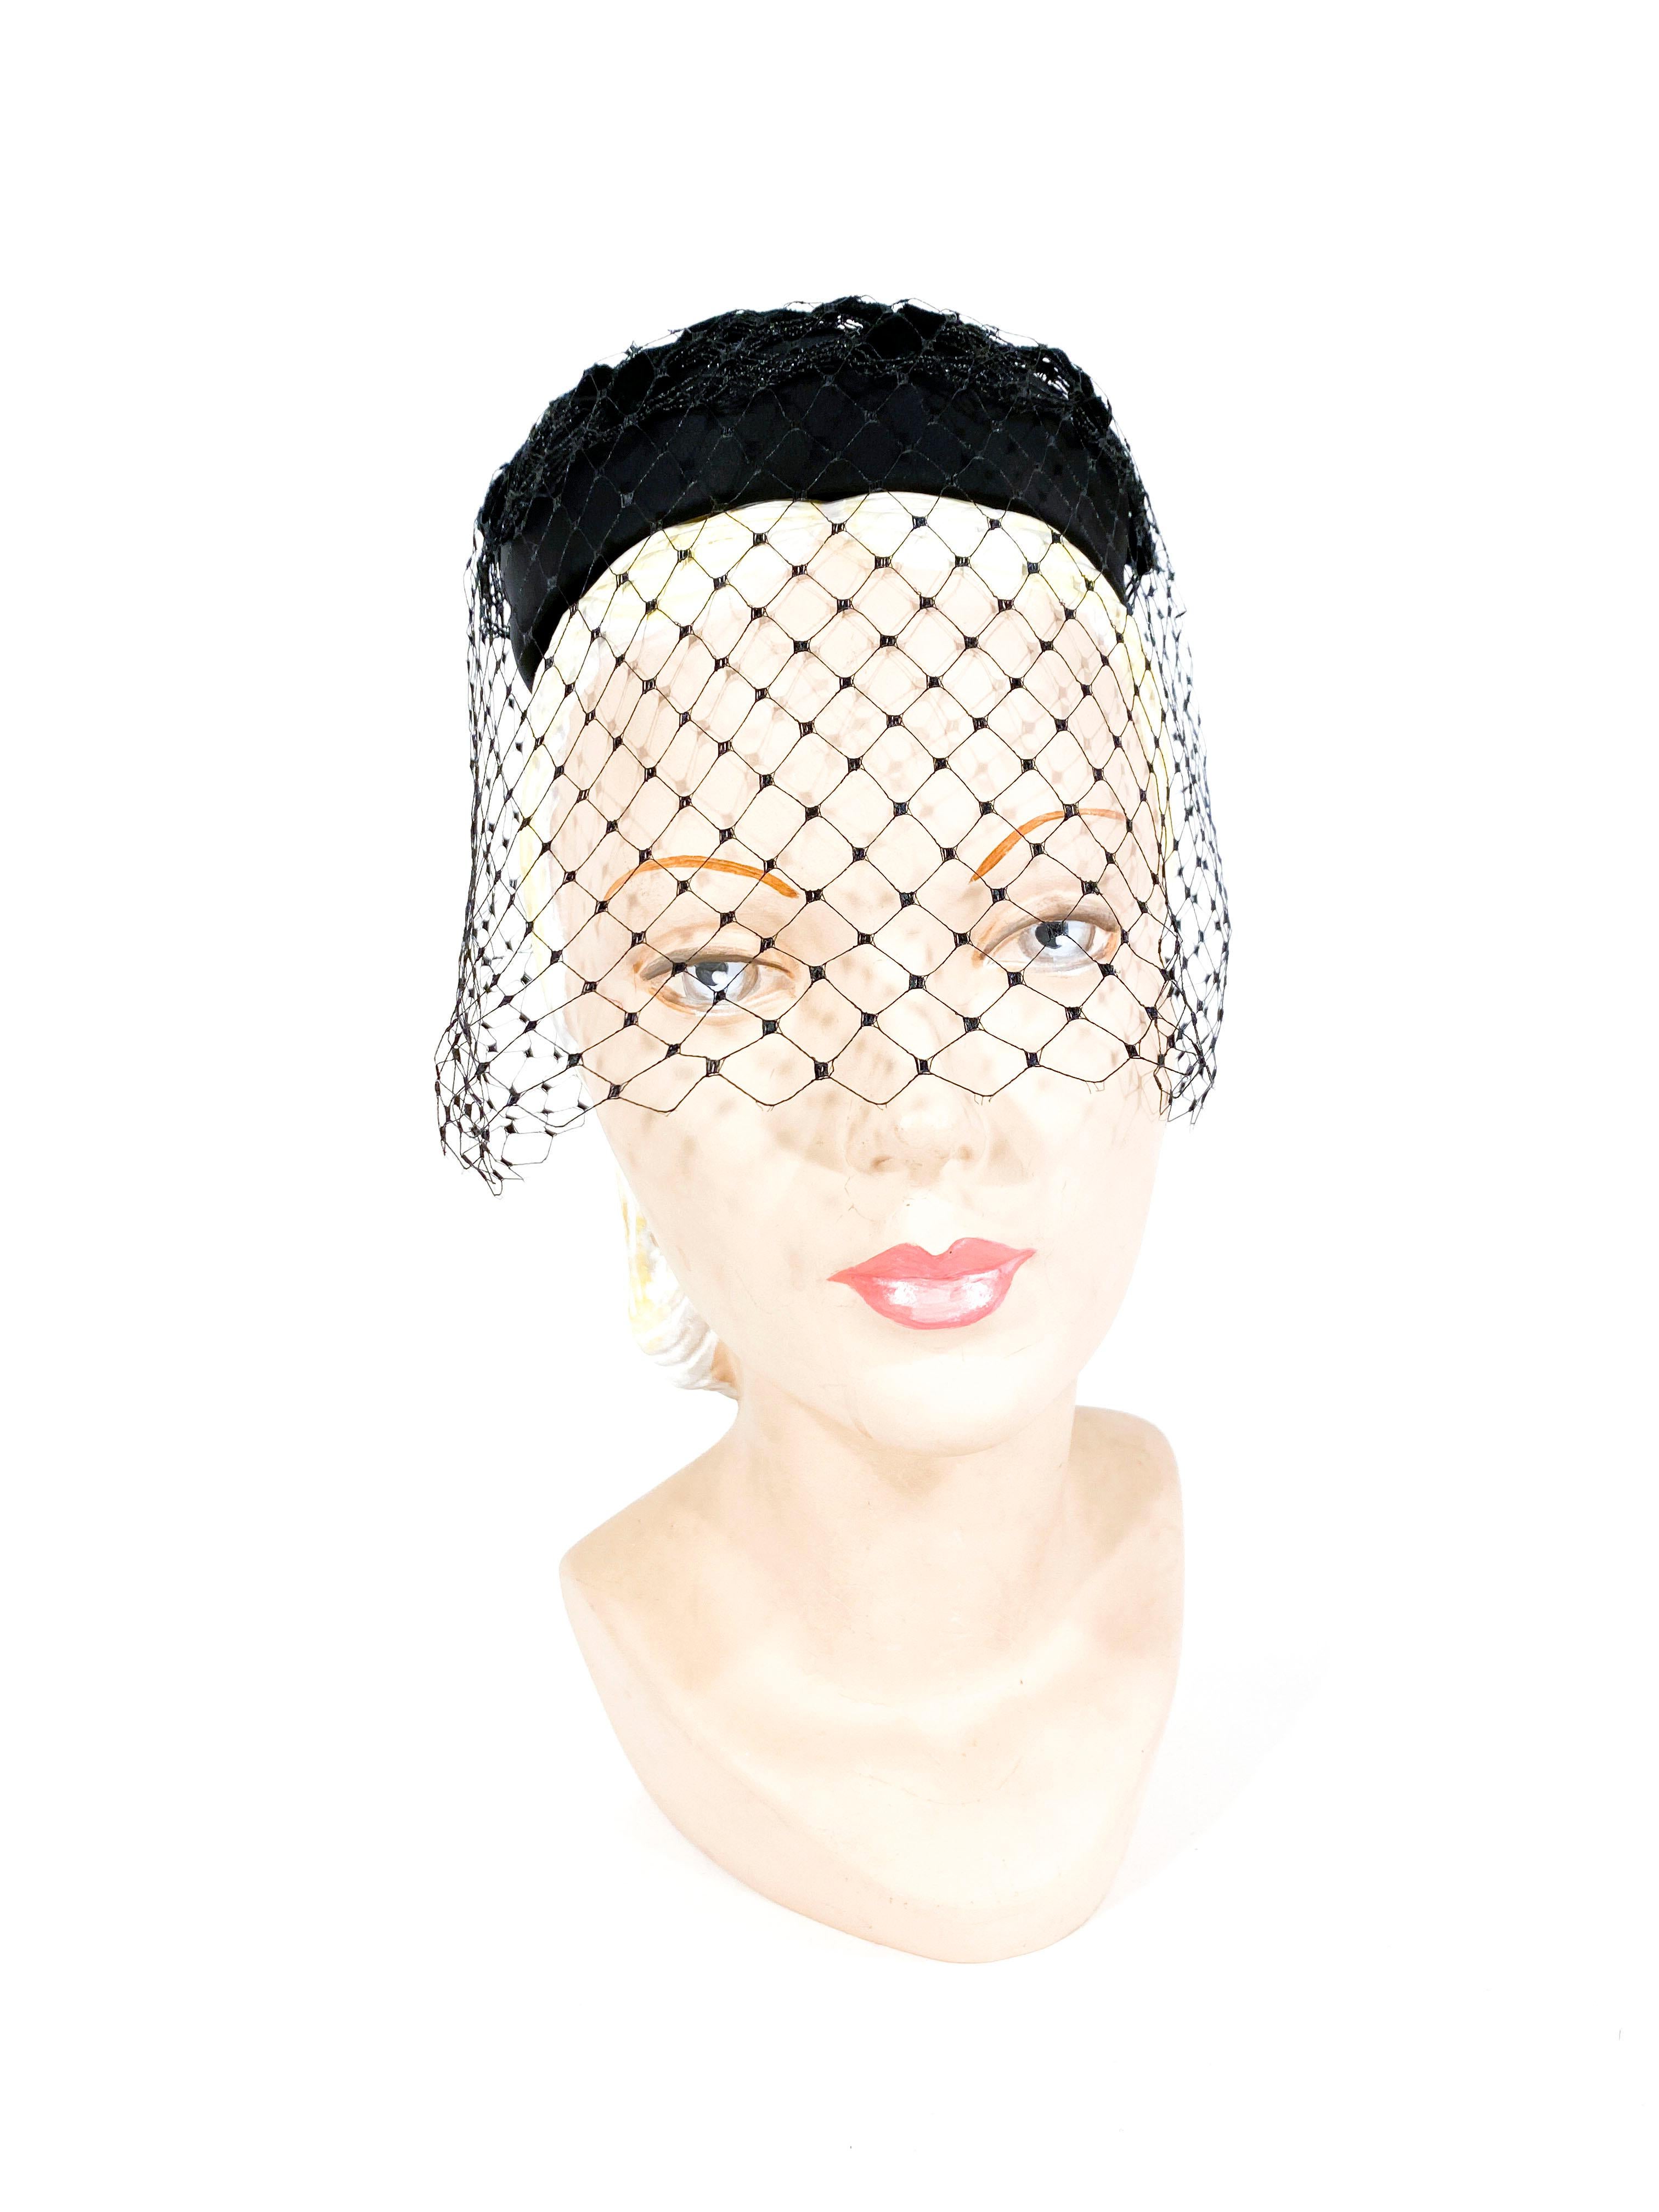 1960s black satin pillbox hat with a zig-zag velvet ribbon intertwined in the net. The net covers all around the head dropping down to past the bridge of the nose. 